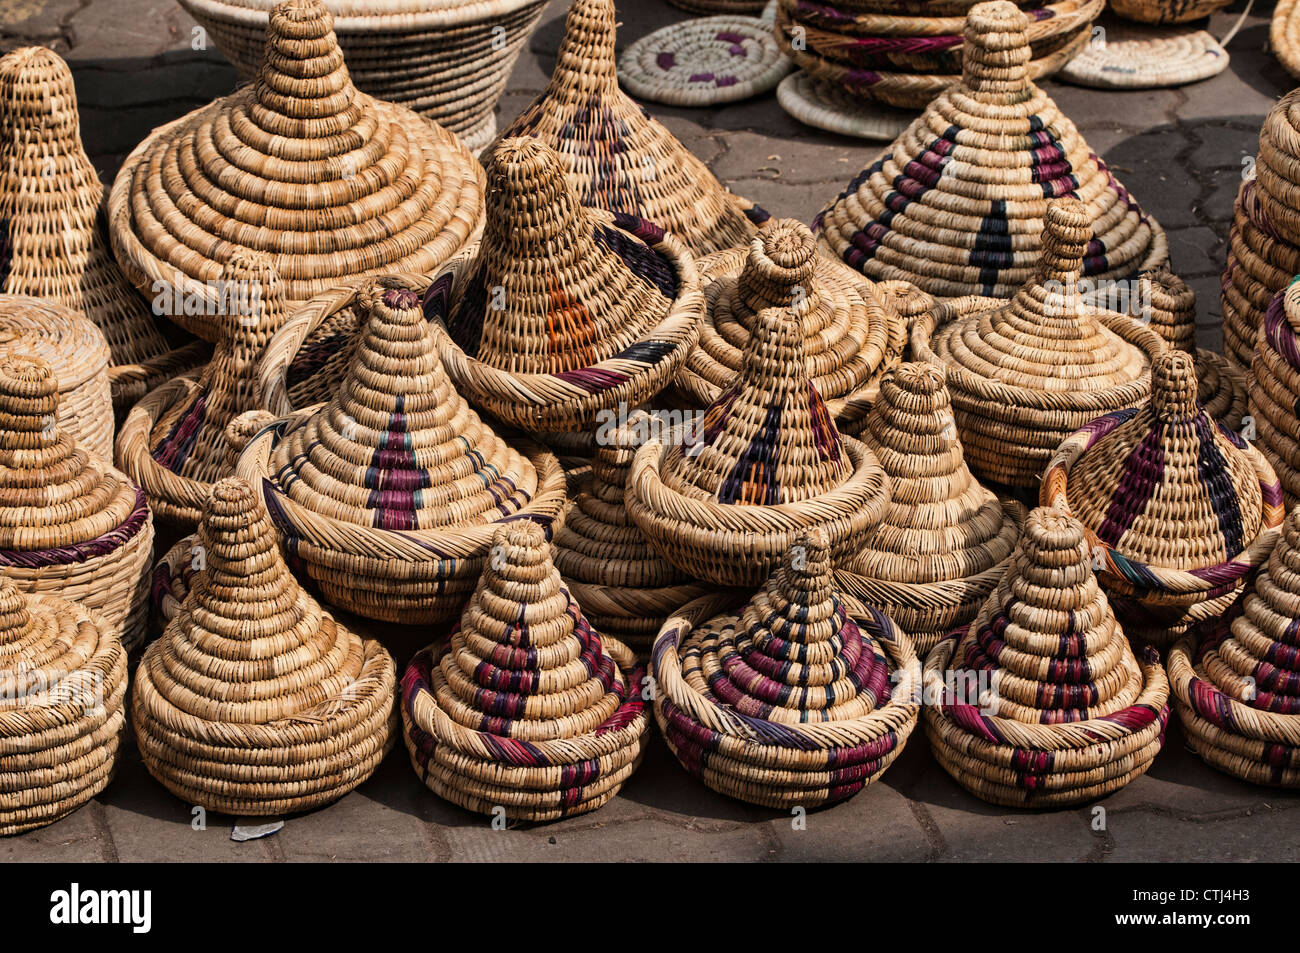 a basket souk market in the ancient medina in Marrakech, Morocco Stock Photo